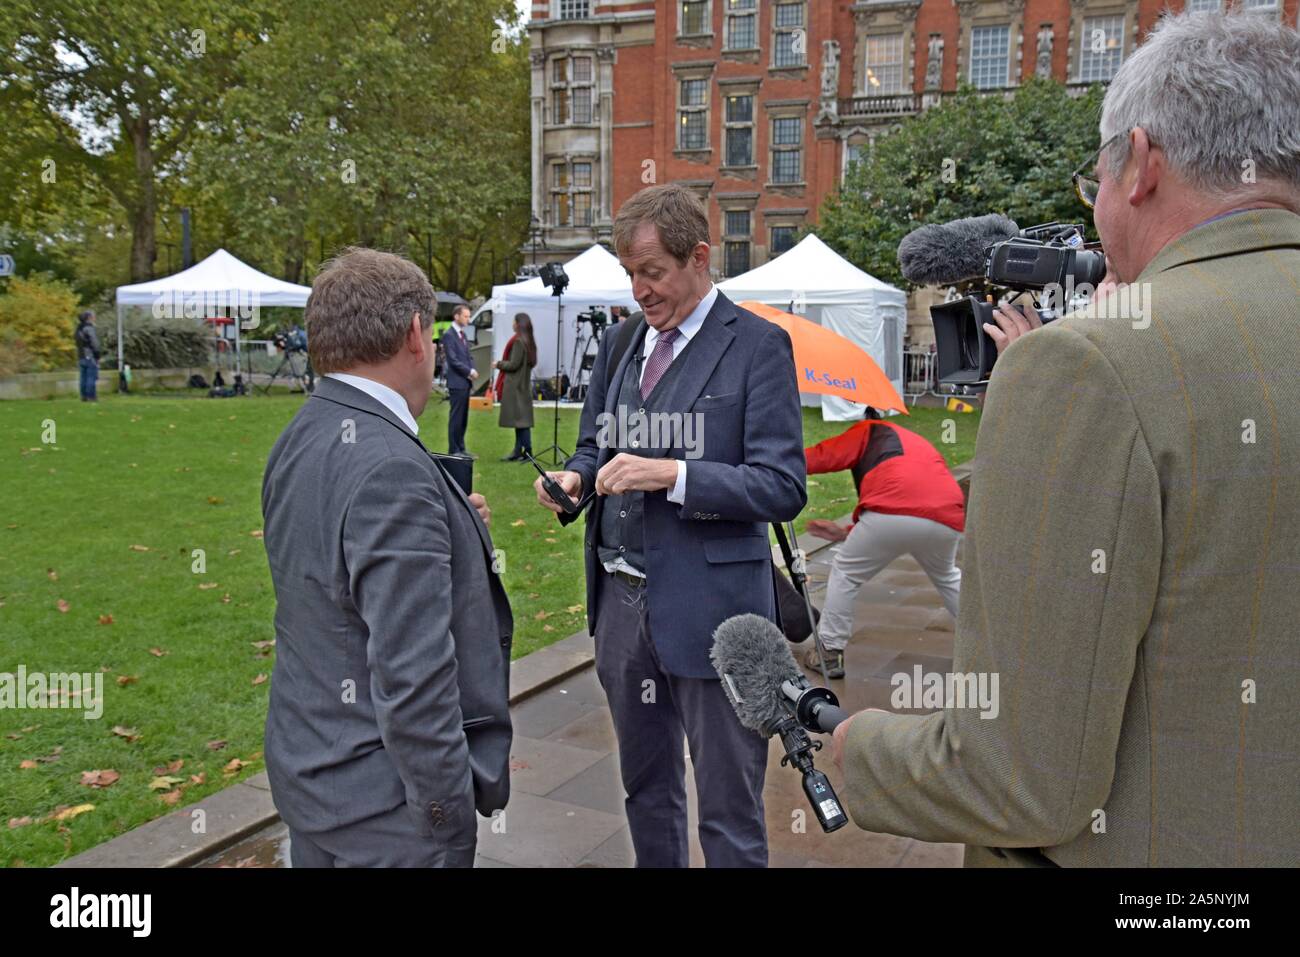 Andrew Bridgen MP, member of Conservative Brexit supporting ERG meets Alistair Campbell, remain campaigner on College Green, Westminster 21-10-19 Stock Photo